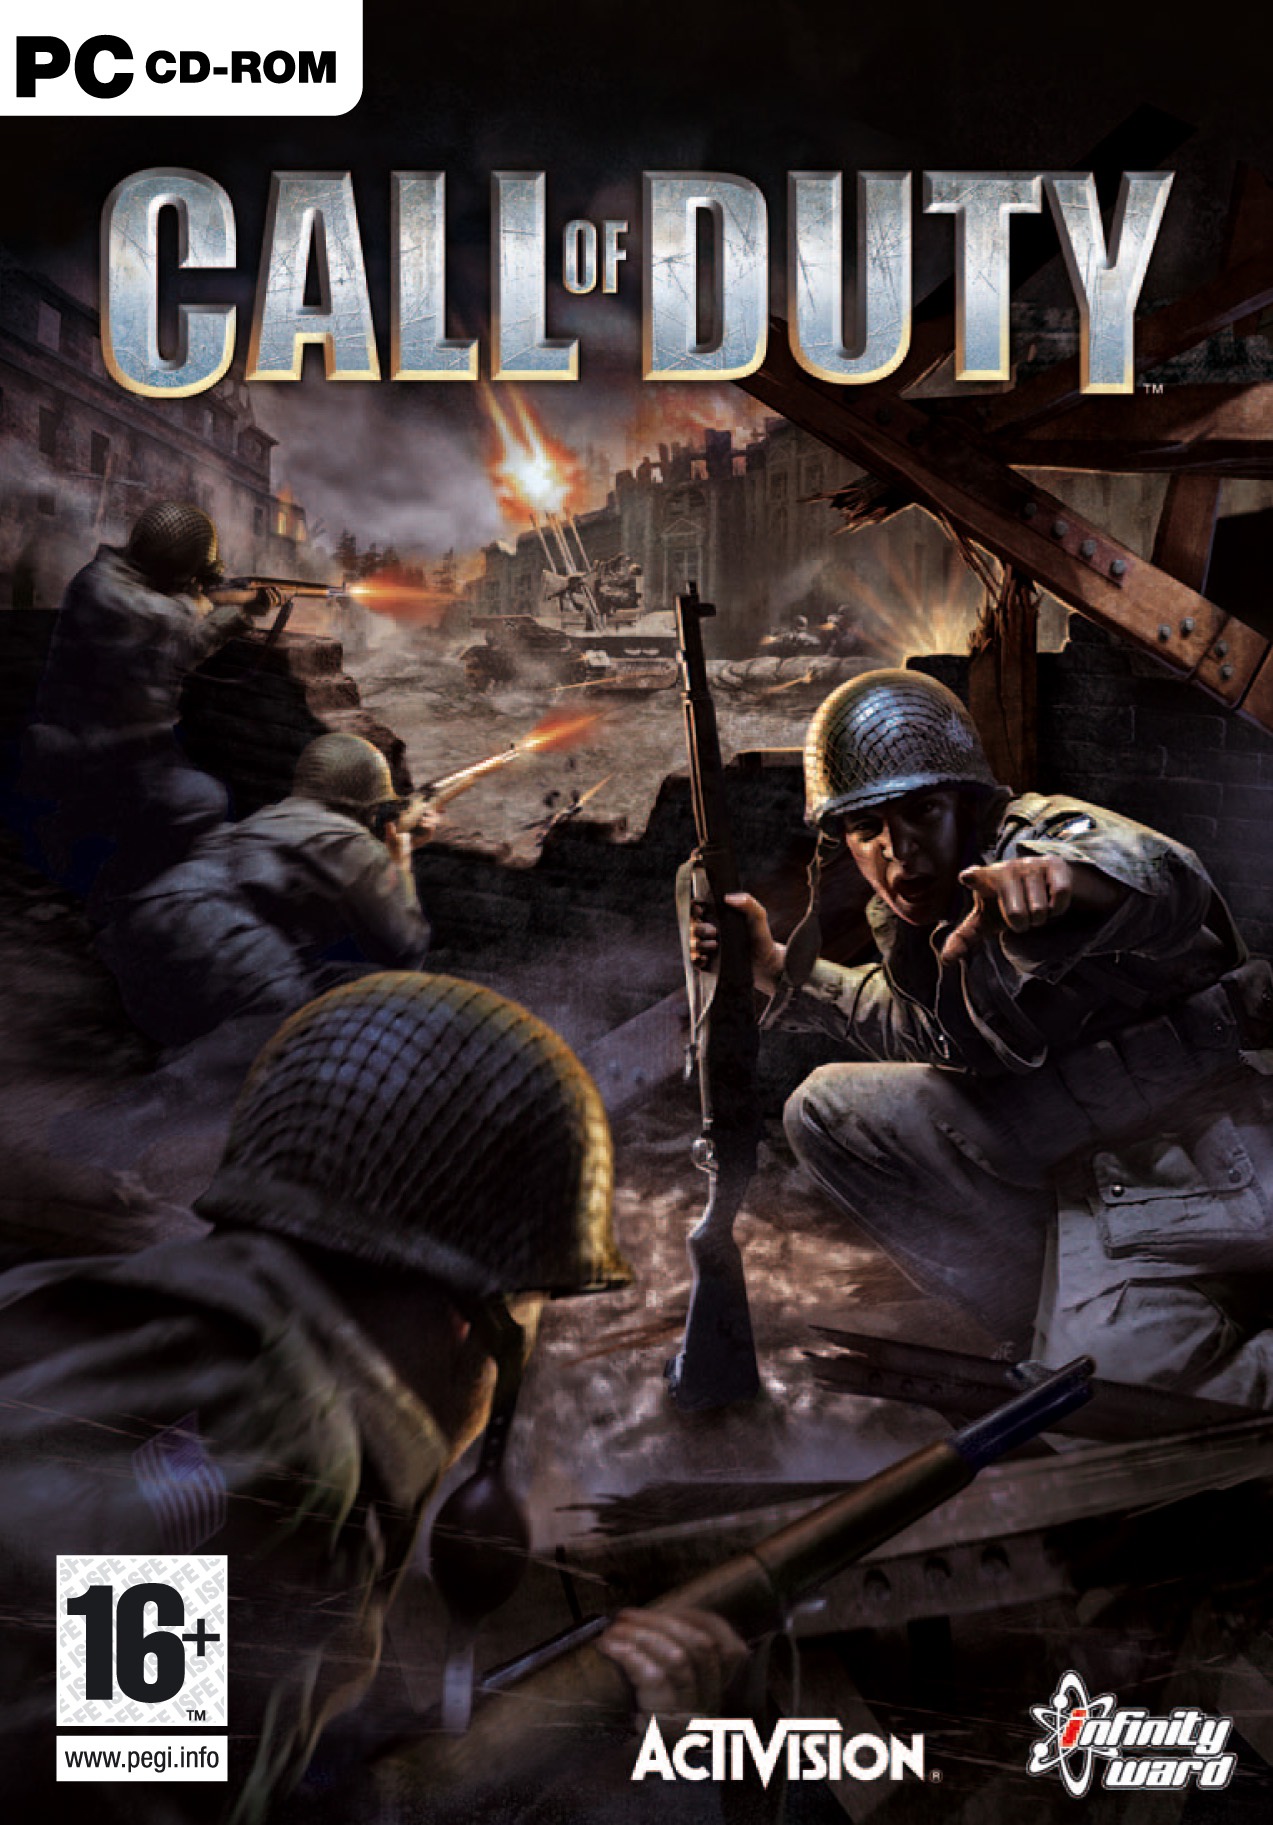 call of duty games list